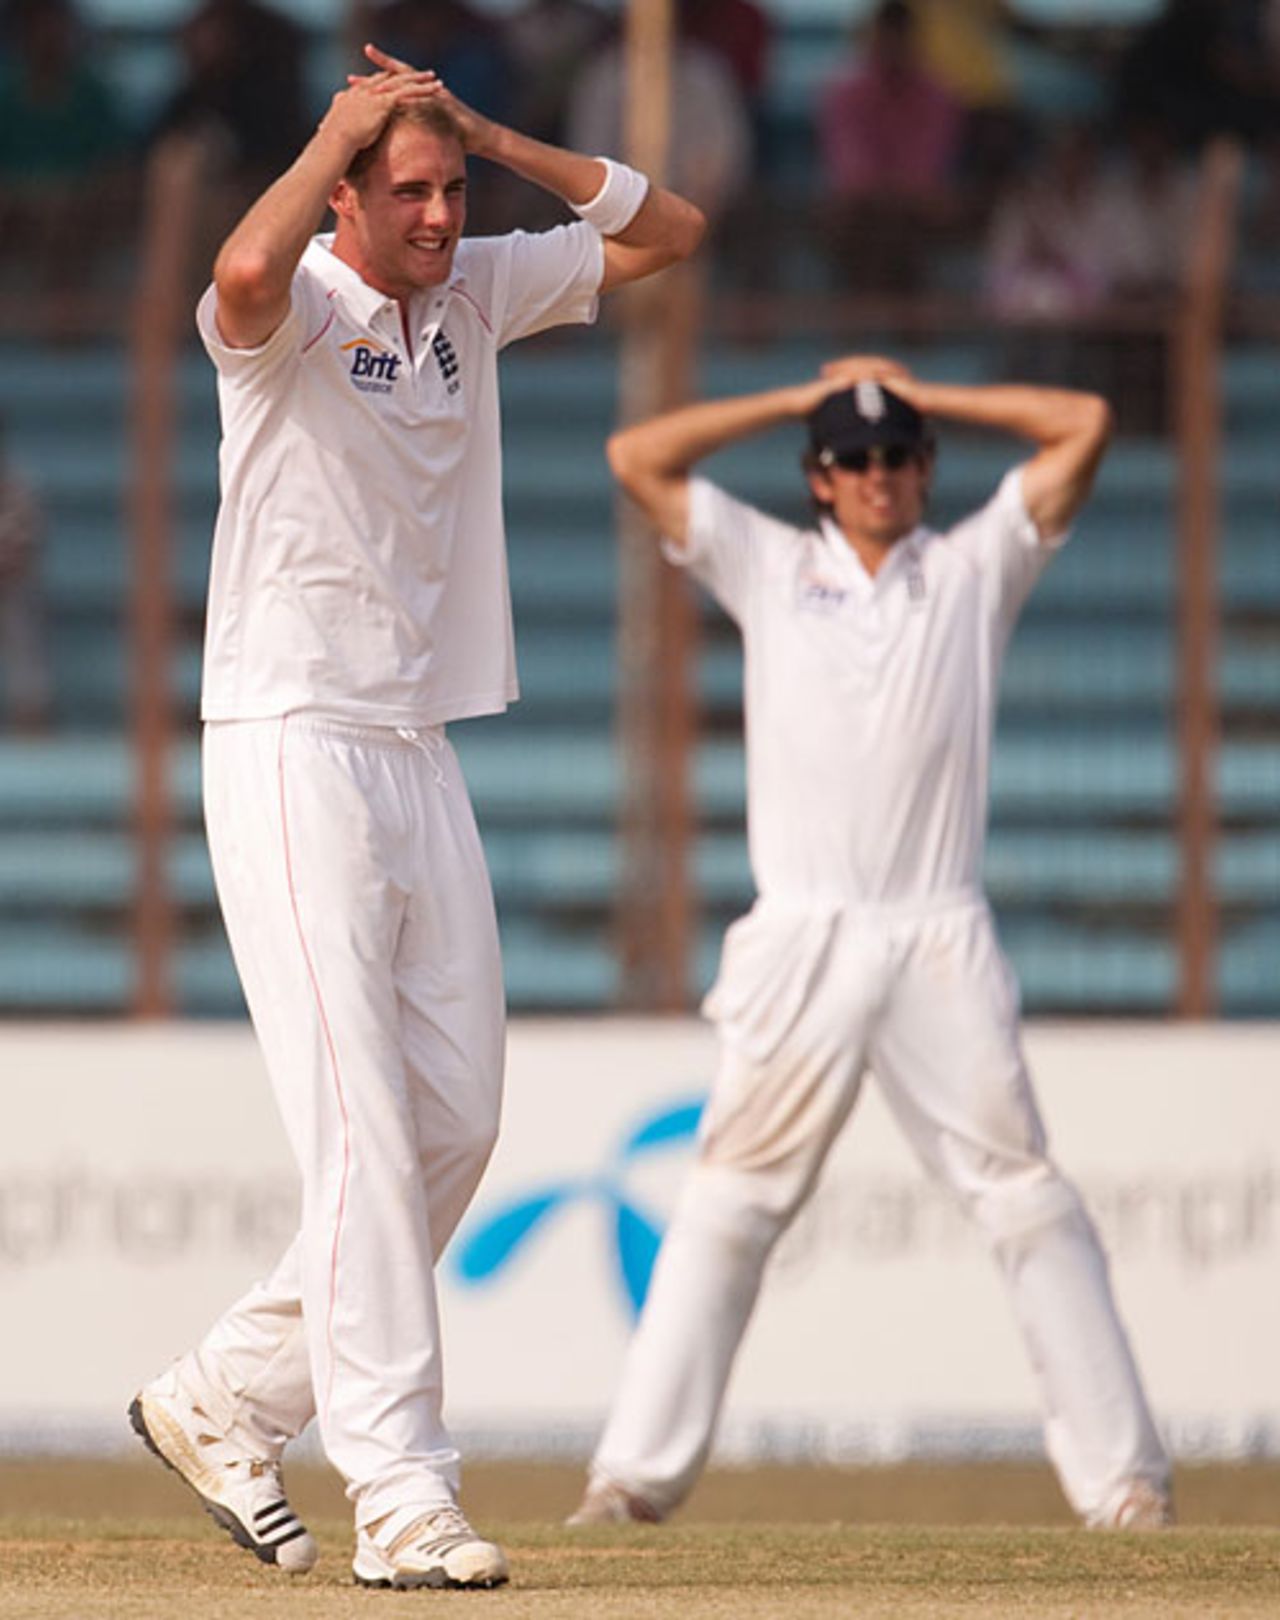 Stuart Broad and the rest of England's bowlers were made to toil on a hot afternoon in Chittagong, Bangladesh v England, 1st Test, Chittagong, March 15, 2010